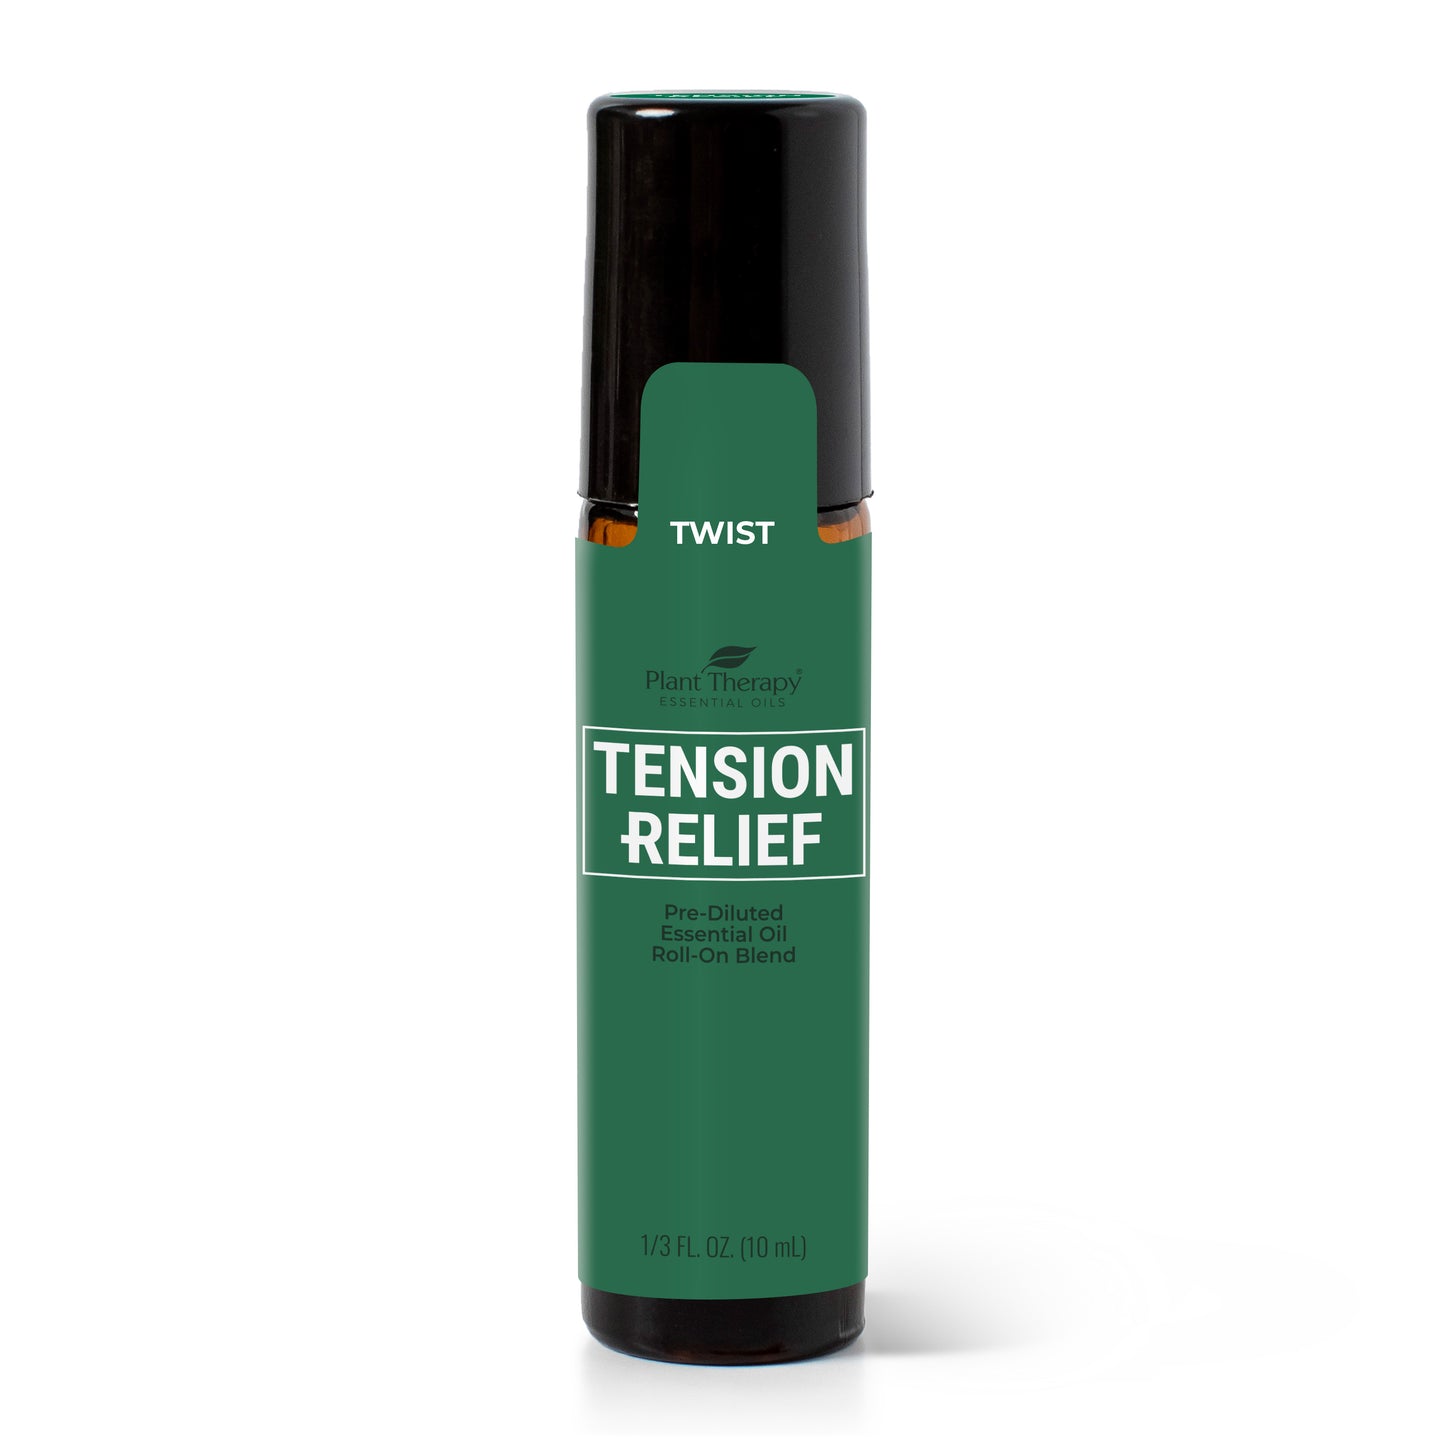 Tension Relief Essential Oil Blend Pre-Diluted Roll-On